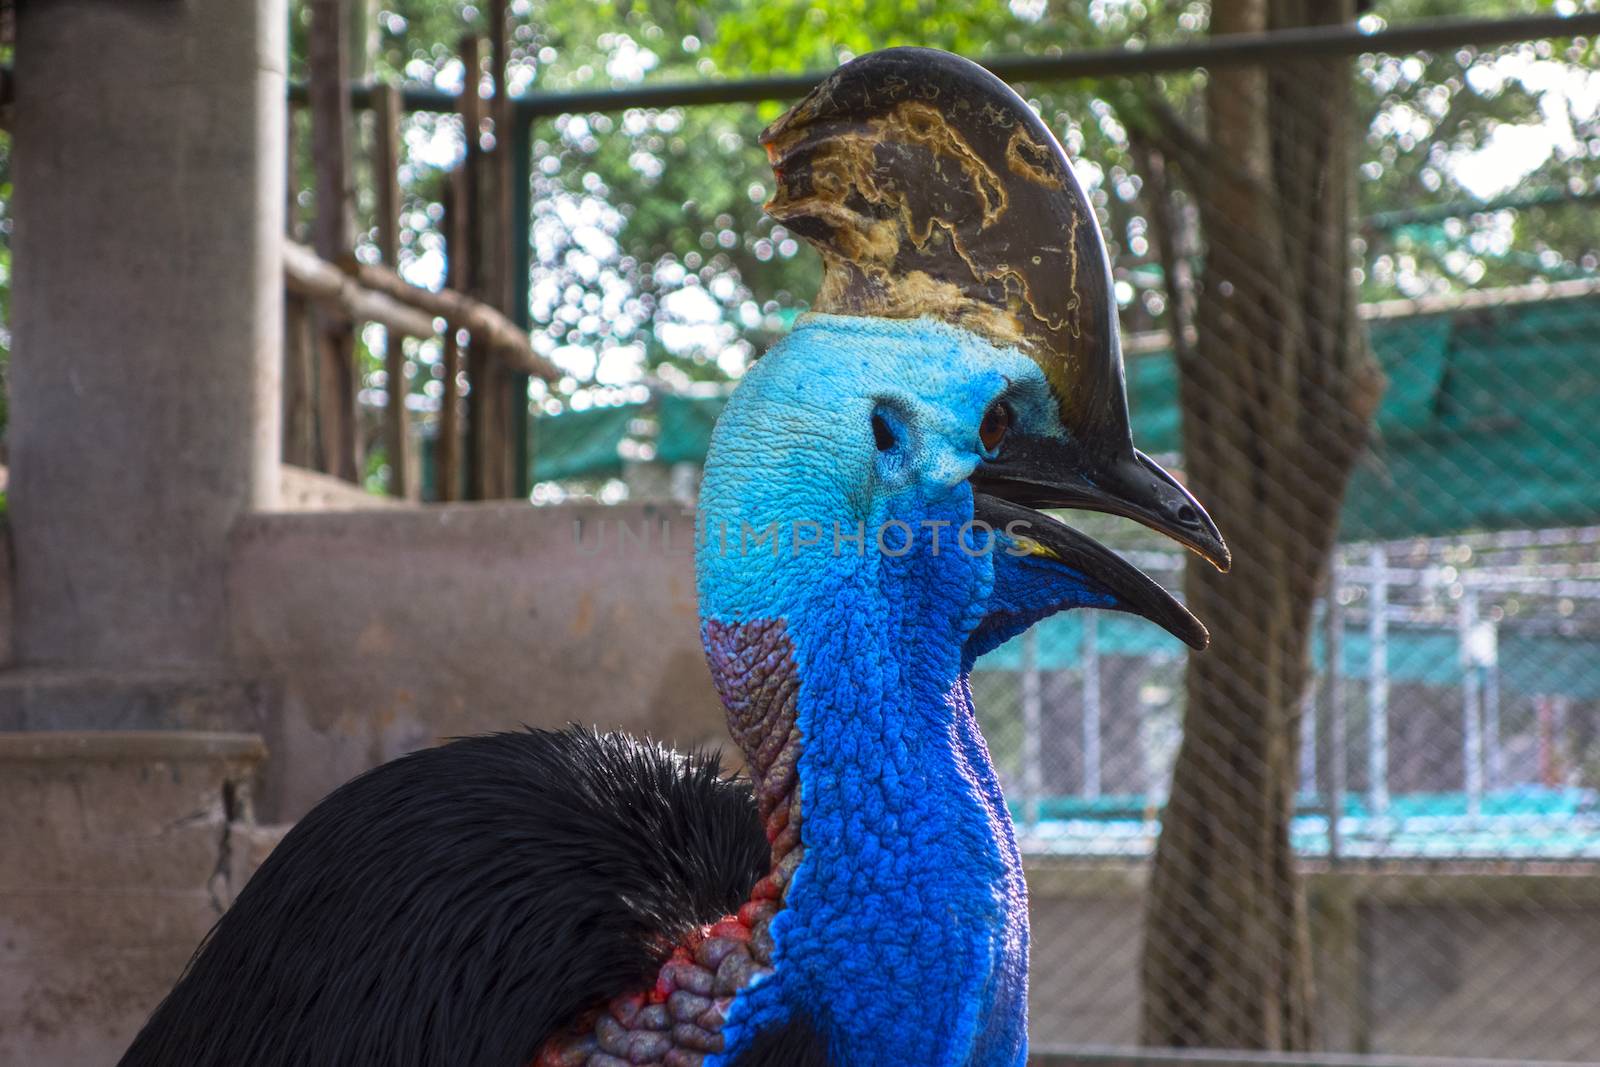 Southern Cassowary  also known as double-wattled cassowary, Australian cassowary or two-wattled cassowary.